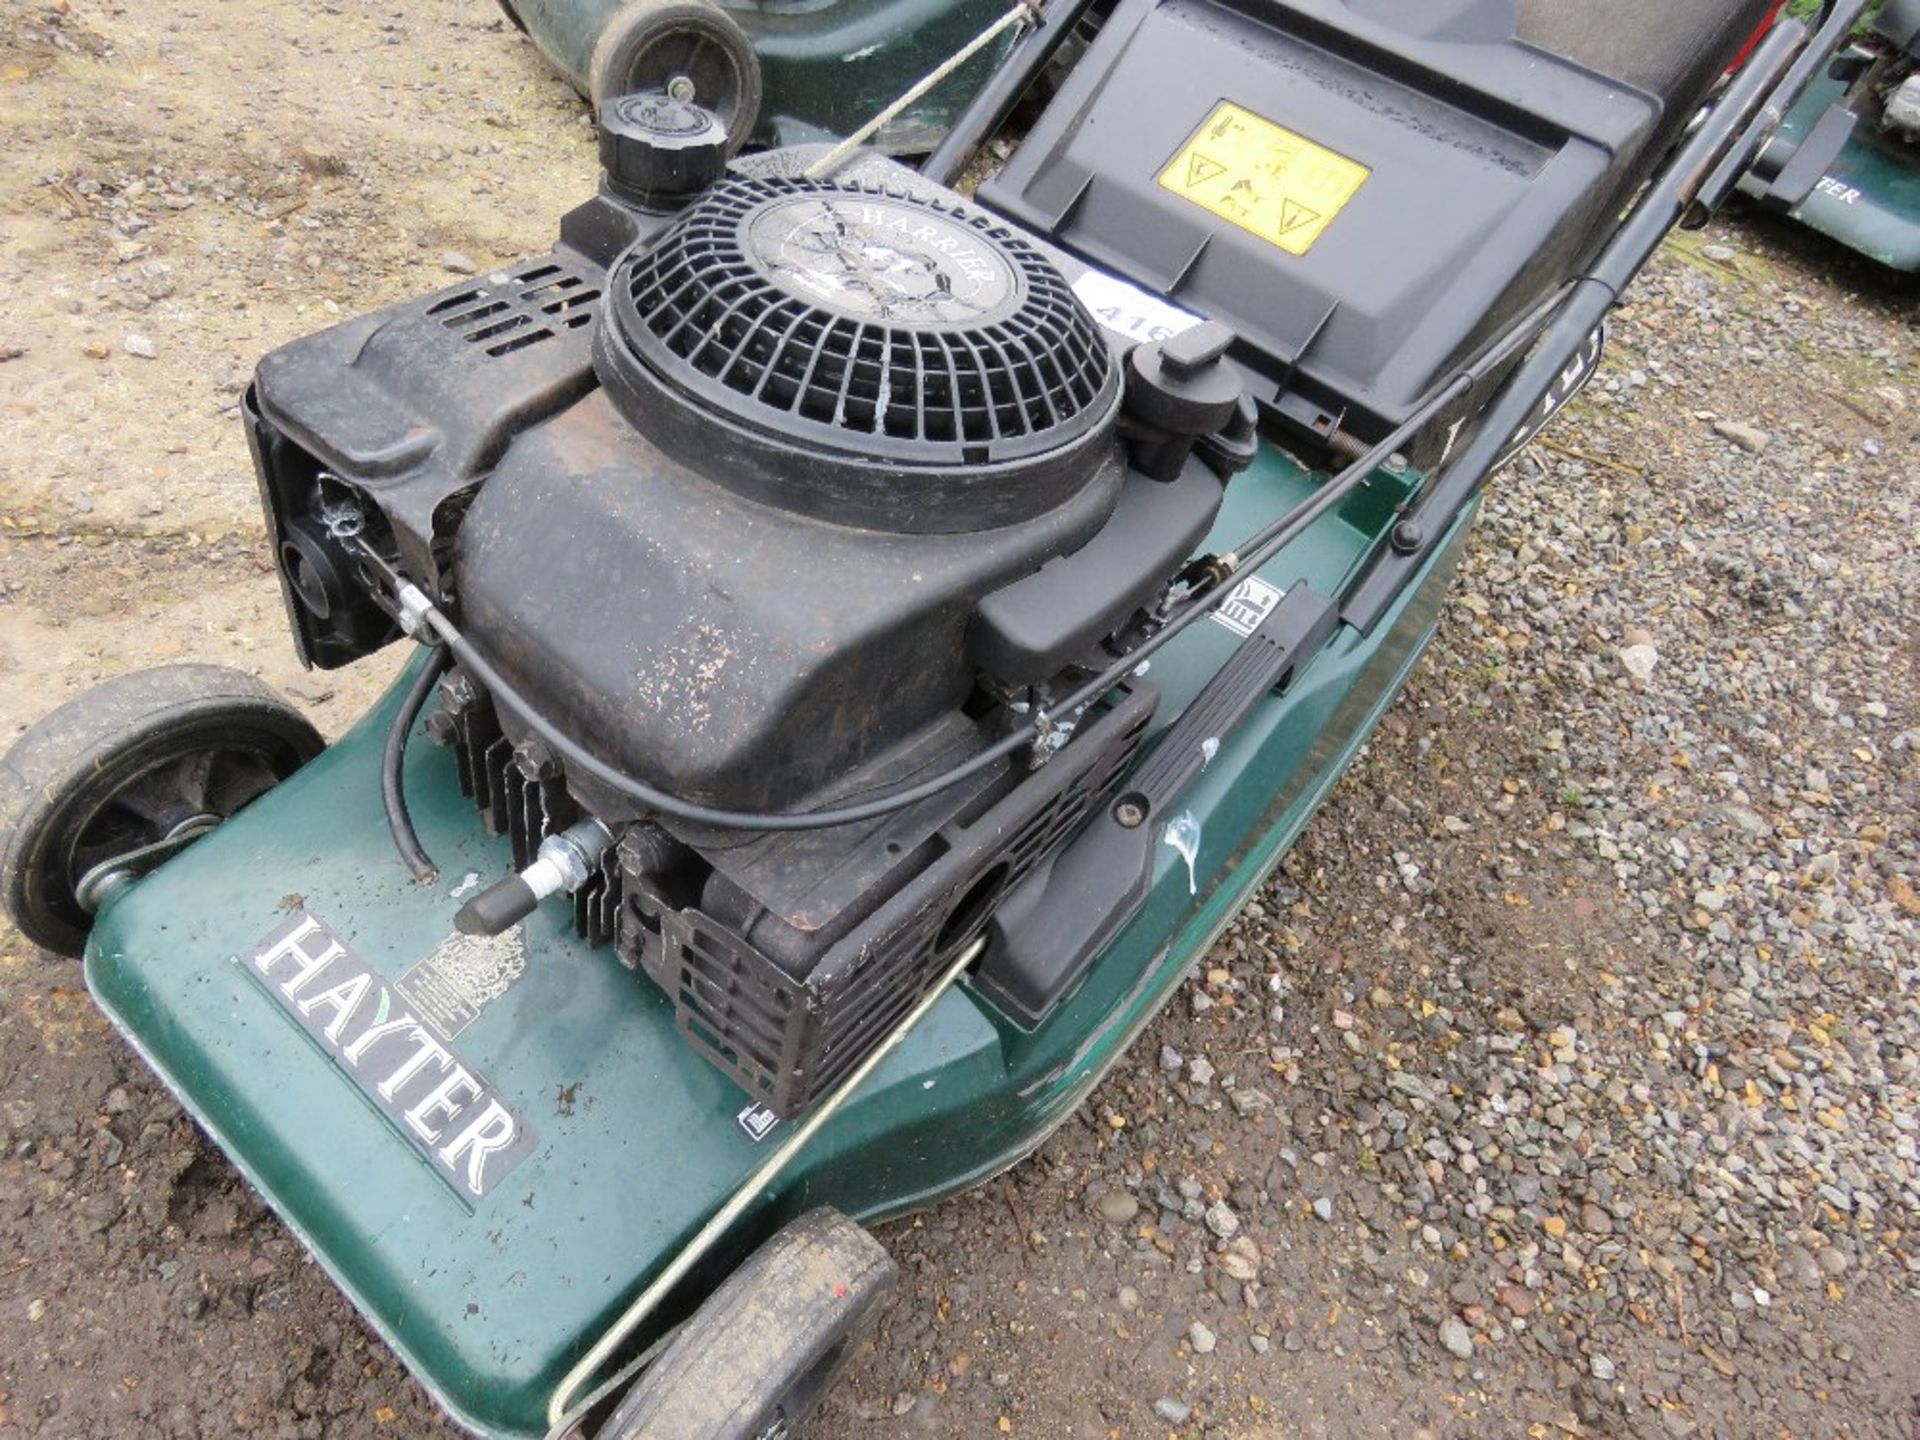 HAYTER HARRIER 41 PETROL ENGINE ROLLER MOWER, NO COLLECTOR.....THIS LOT IS SOLD UNDER THE AUCTIONEER